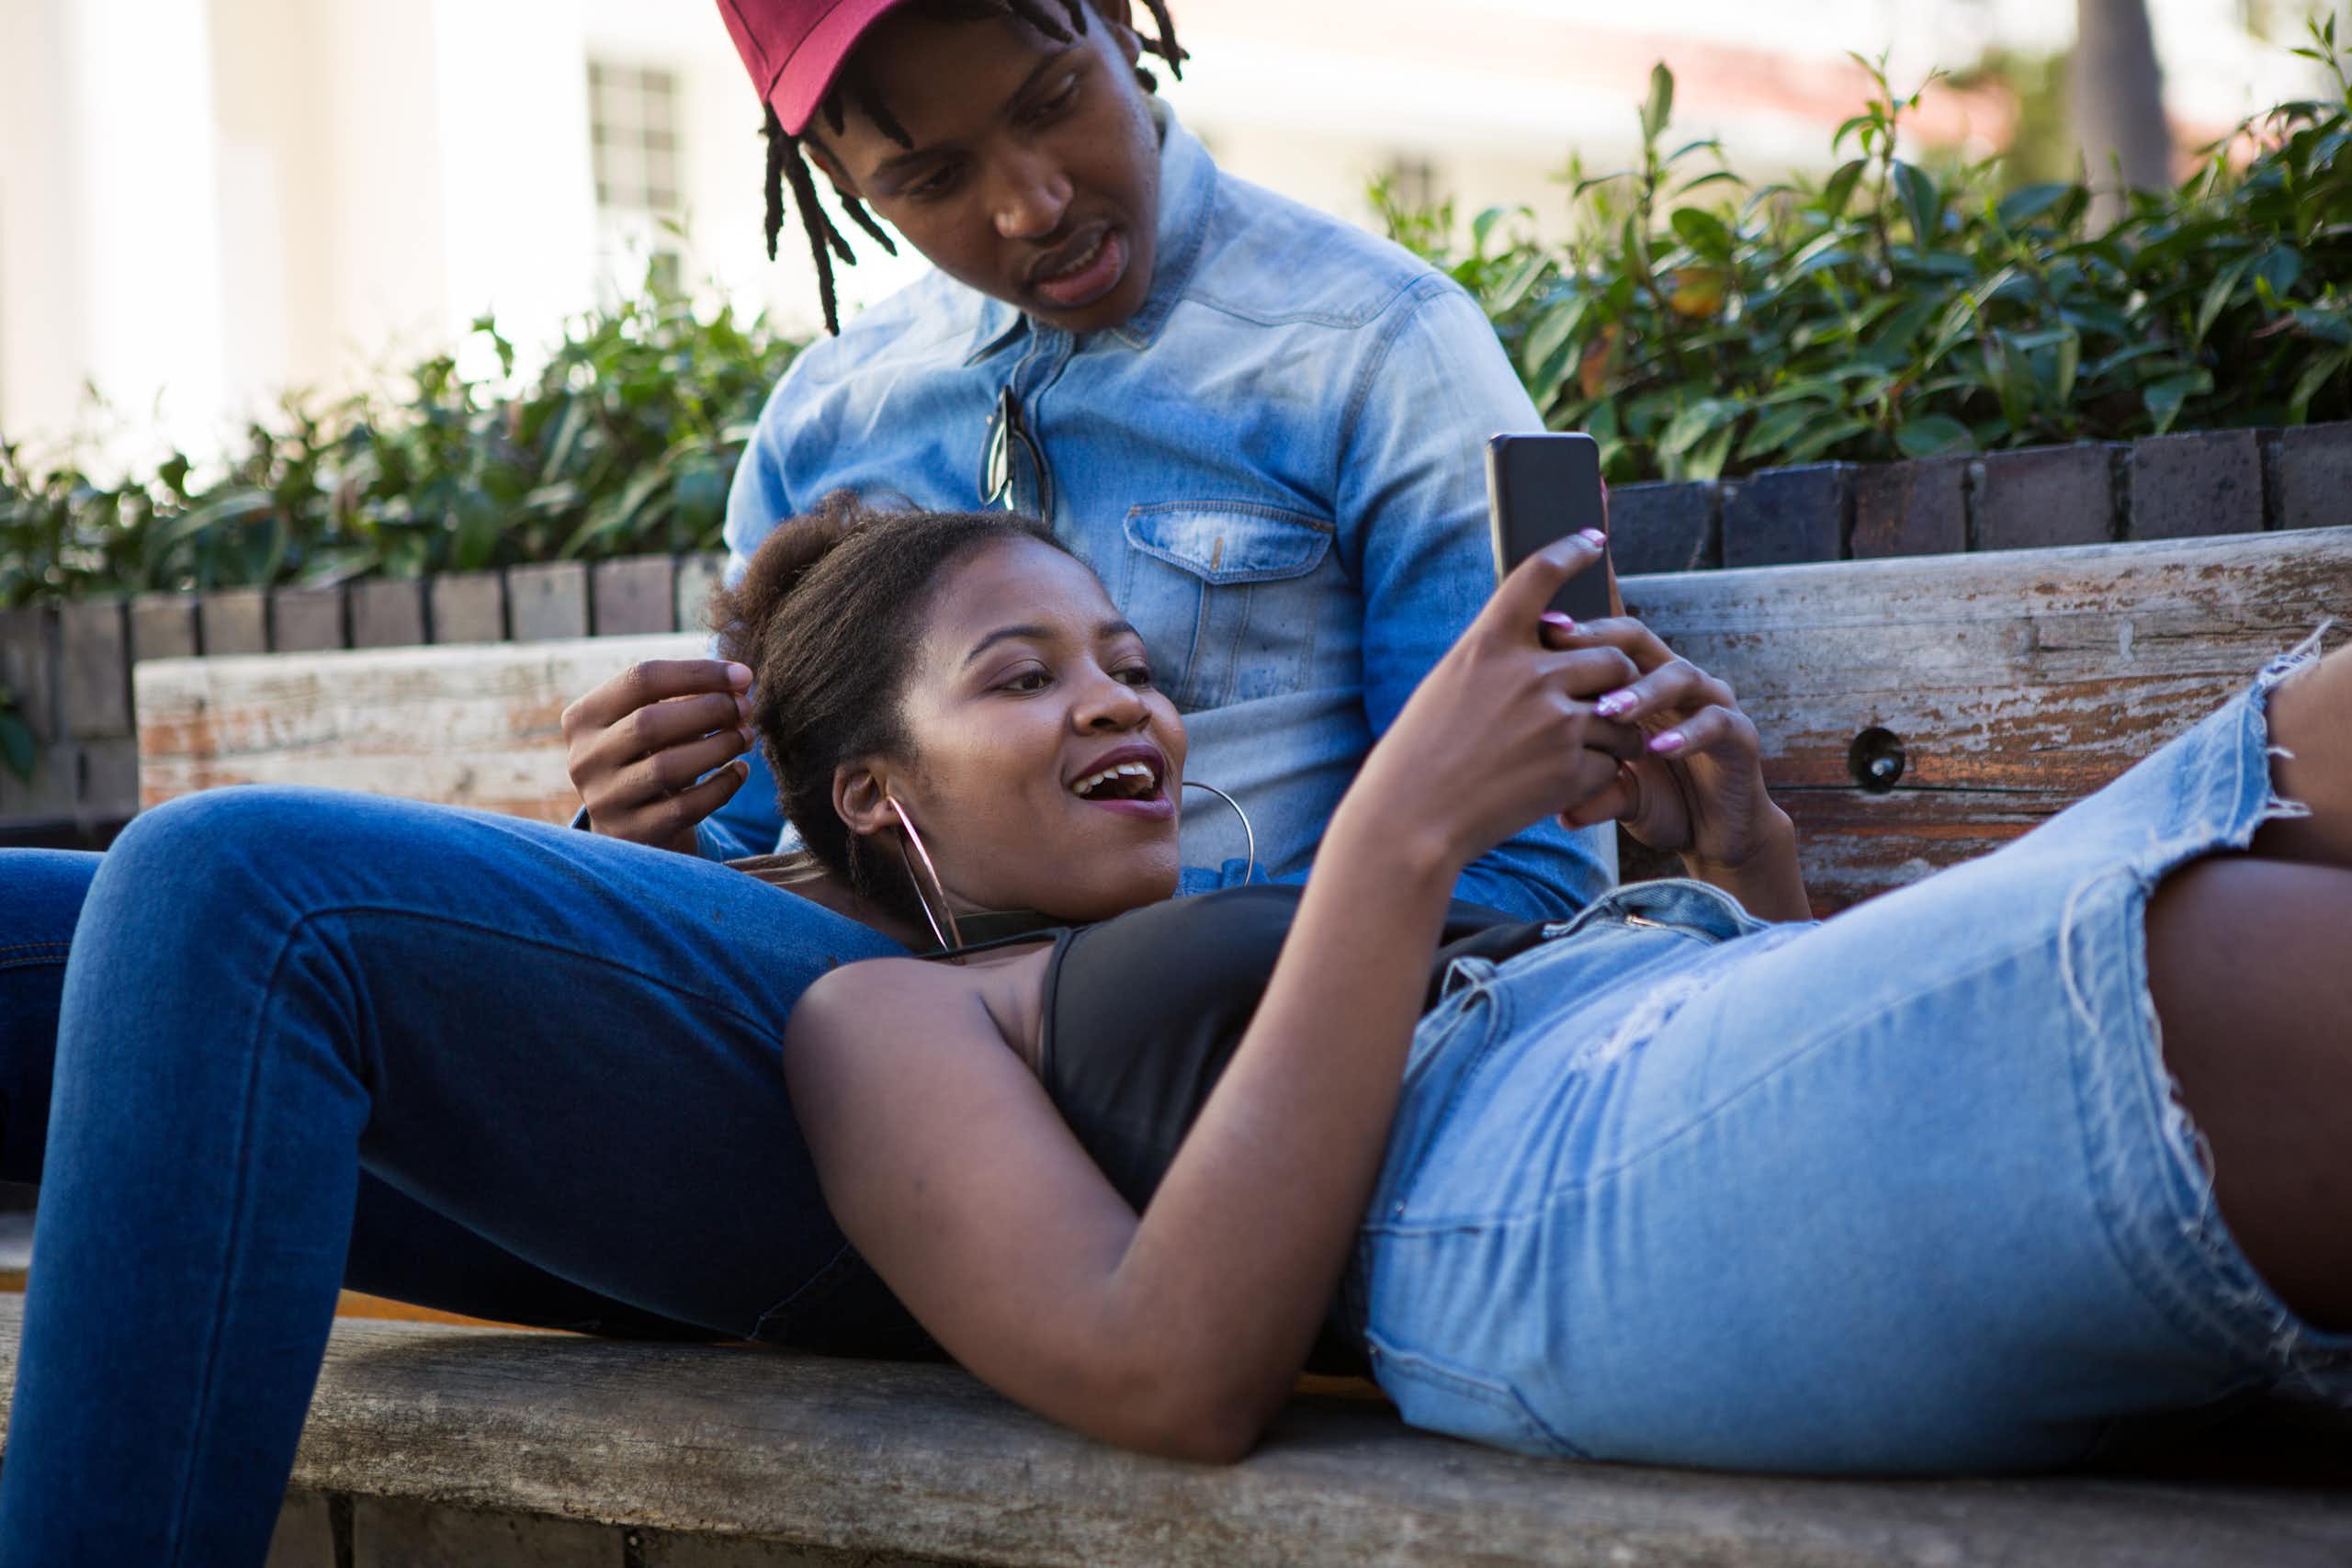 A young woman laughs whlie looking at her cellphone, lounging on a young man's lap. He is also looking at her phone screen